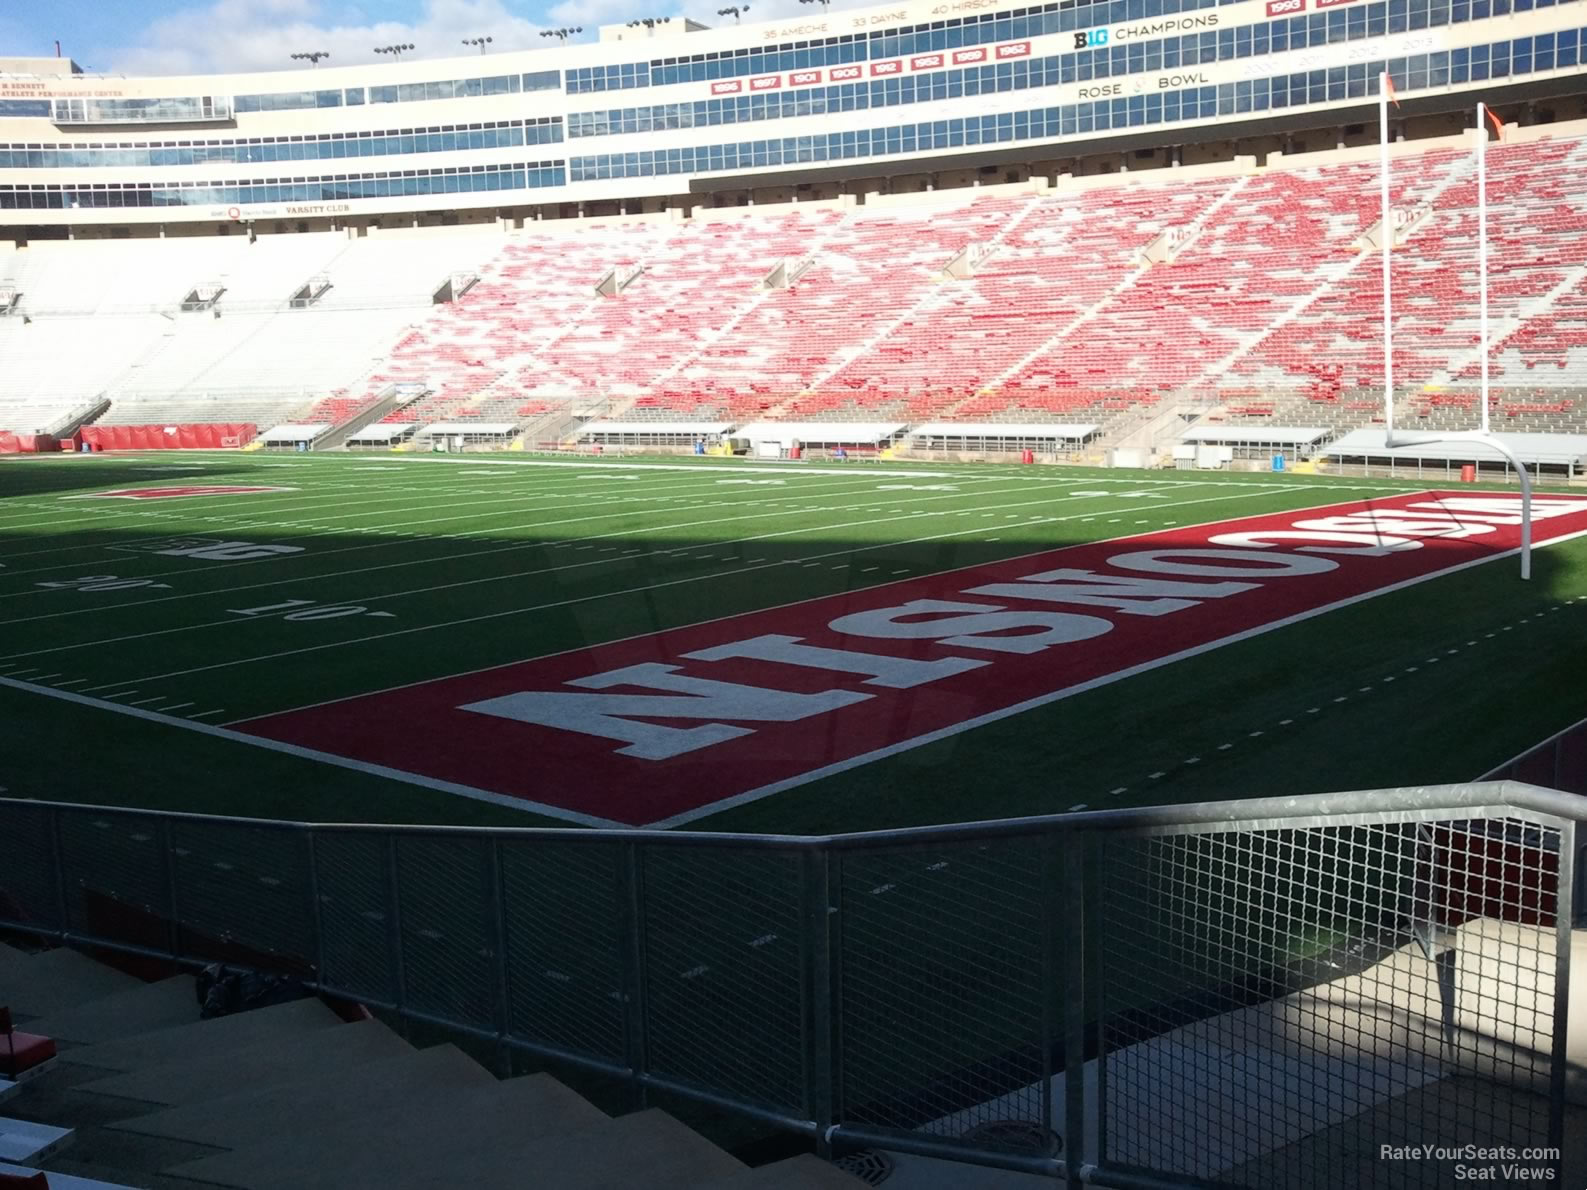 section z1, row 20 seat view  - camp randall stadium